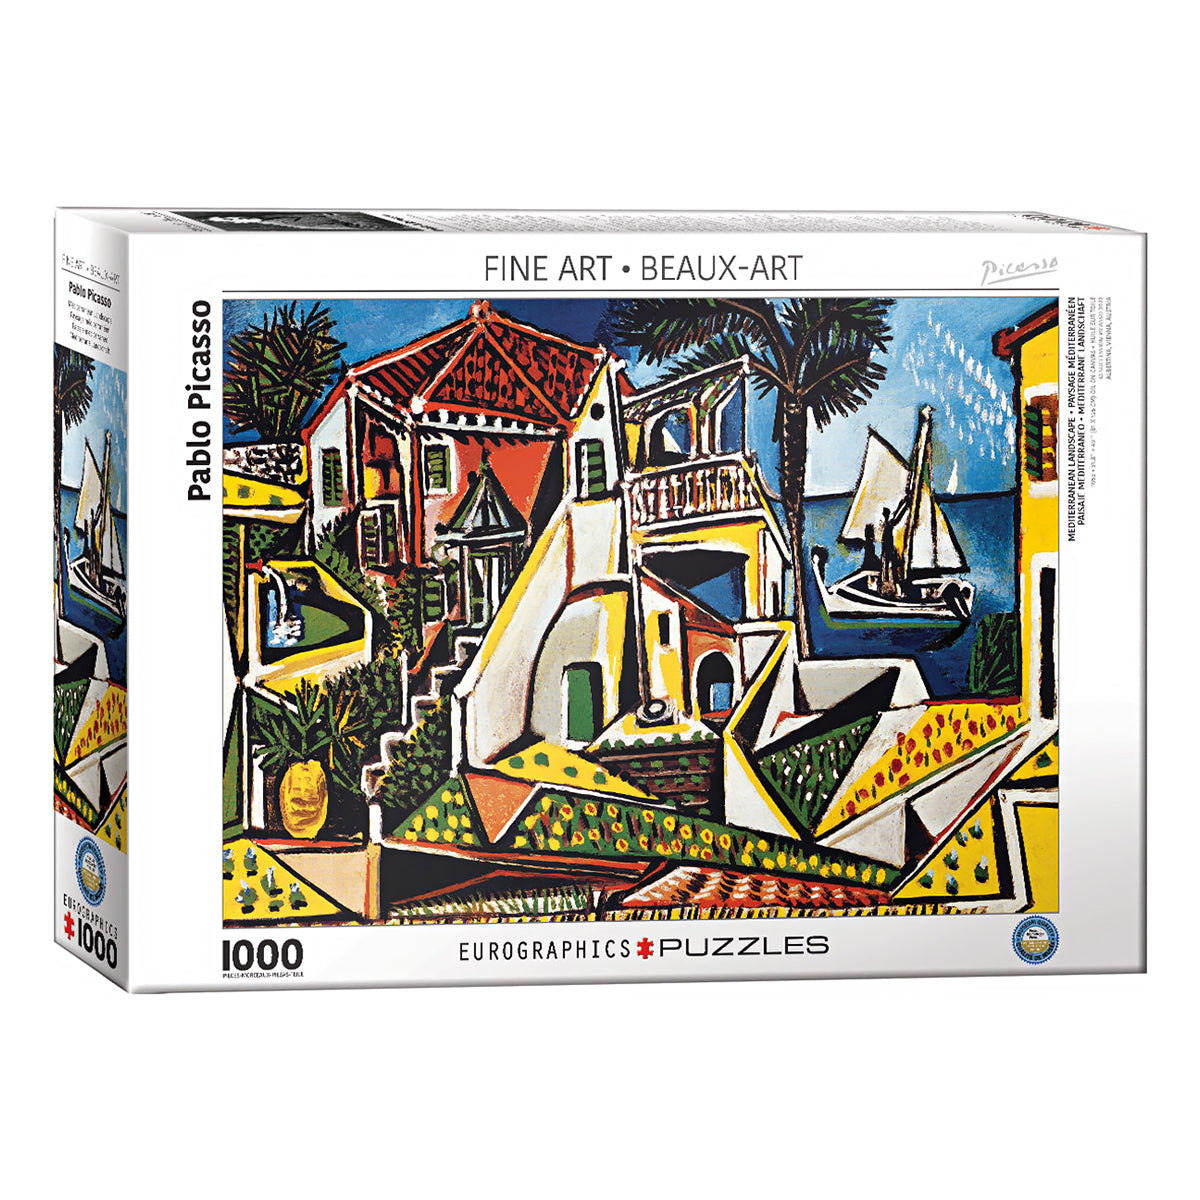 An artistic jigsaw puzzle inspired by Picasso's Mediterranean Landscape, featuring a mix of geometric patterns and organic forms.